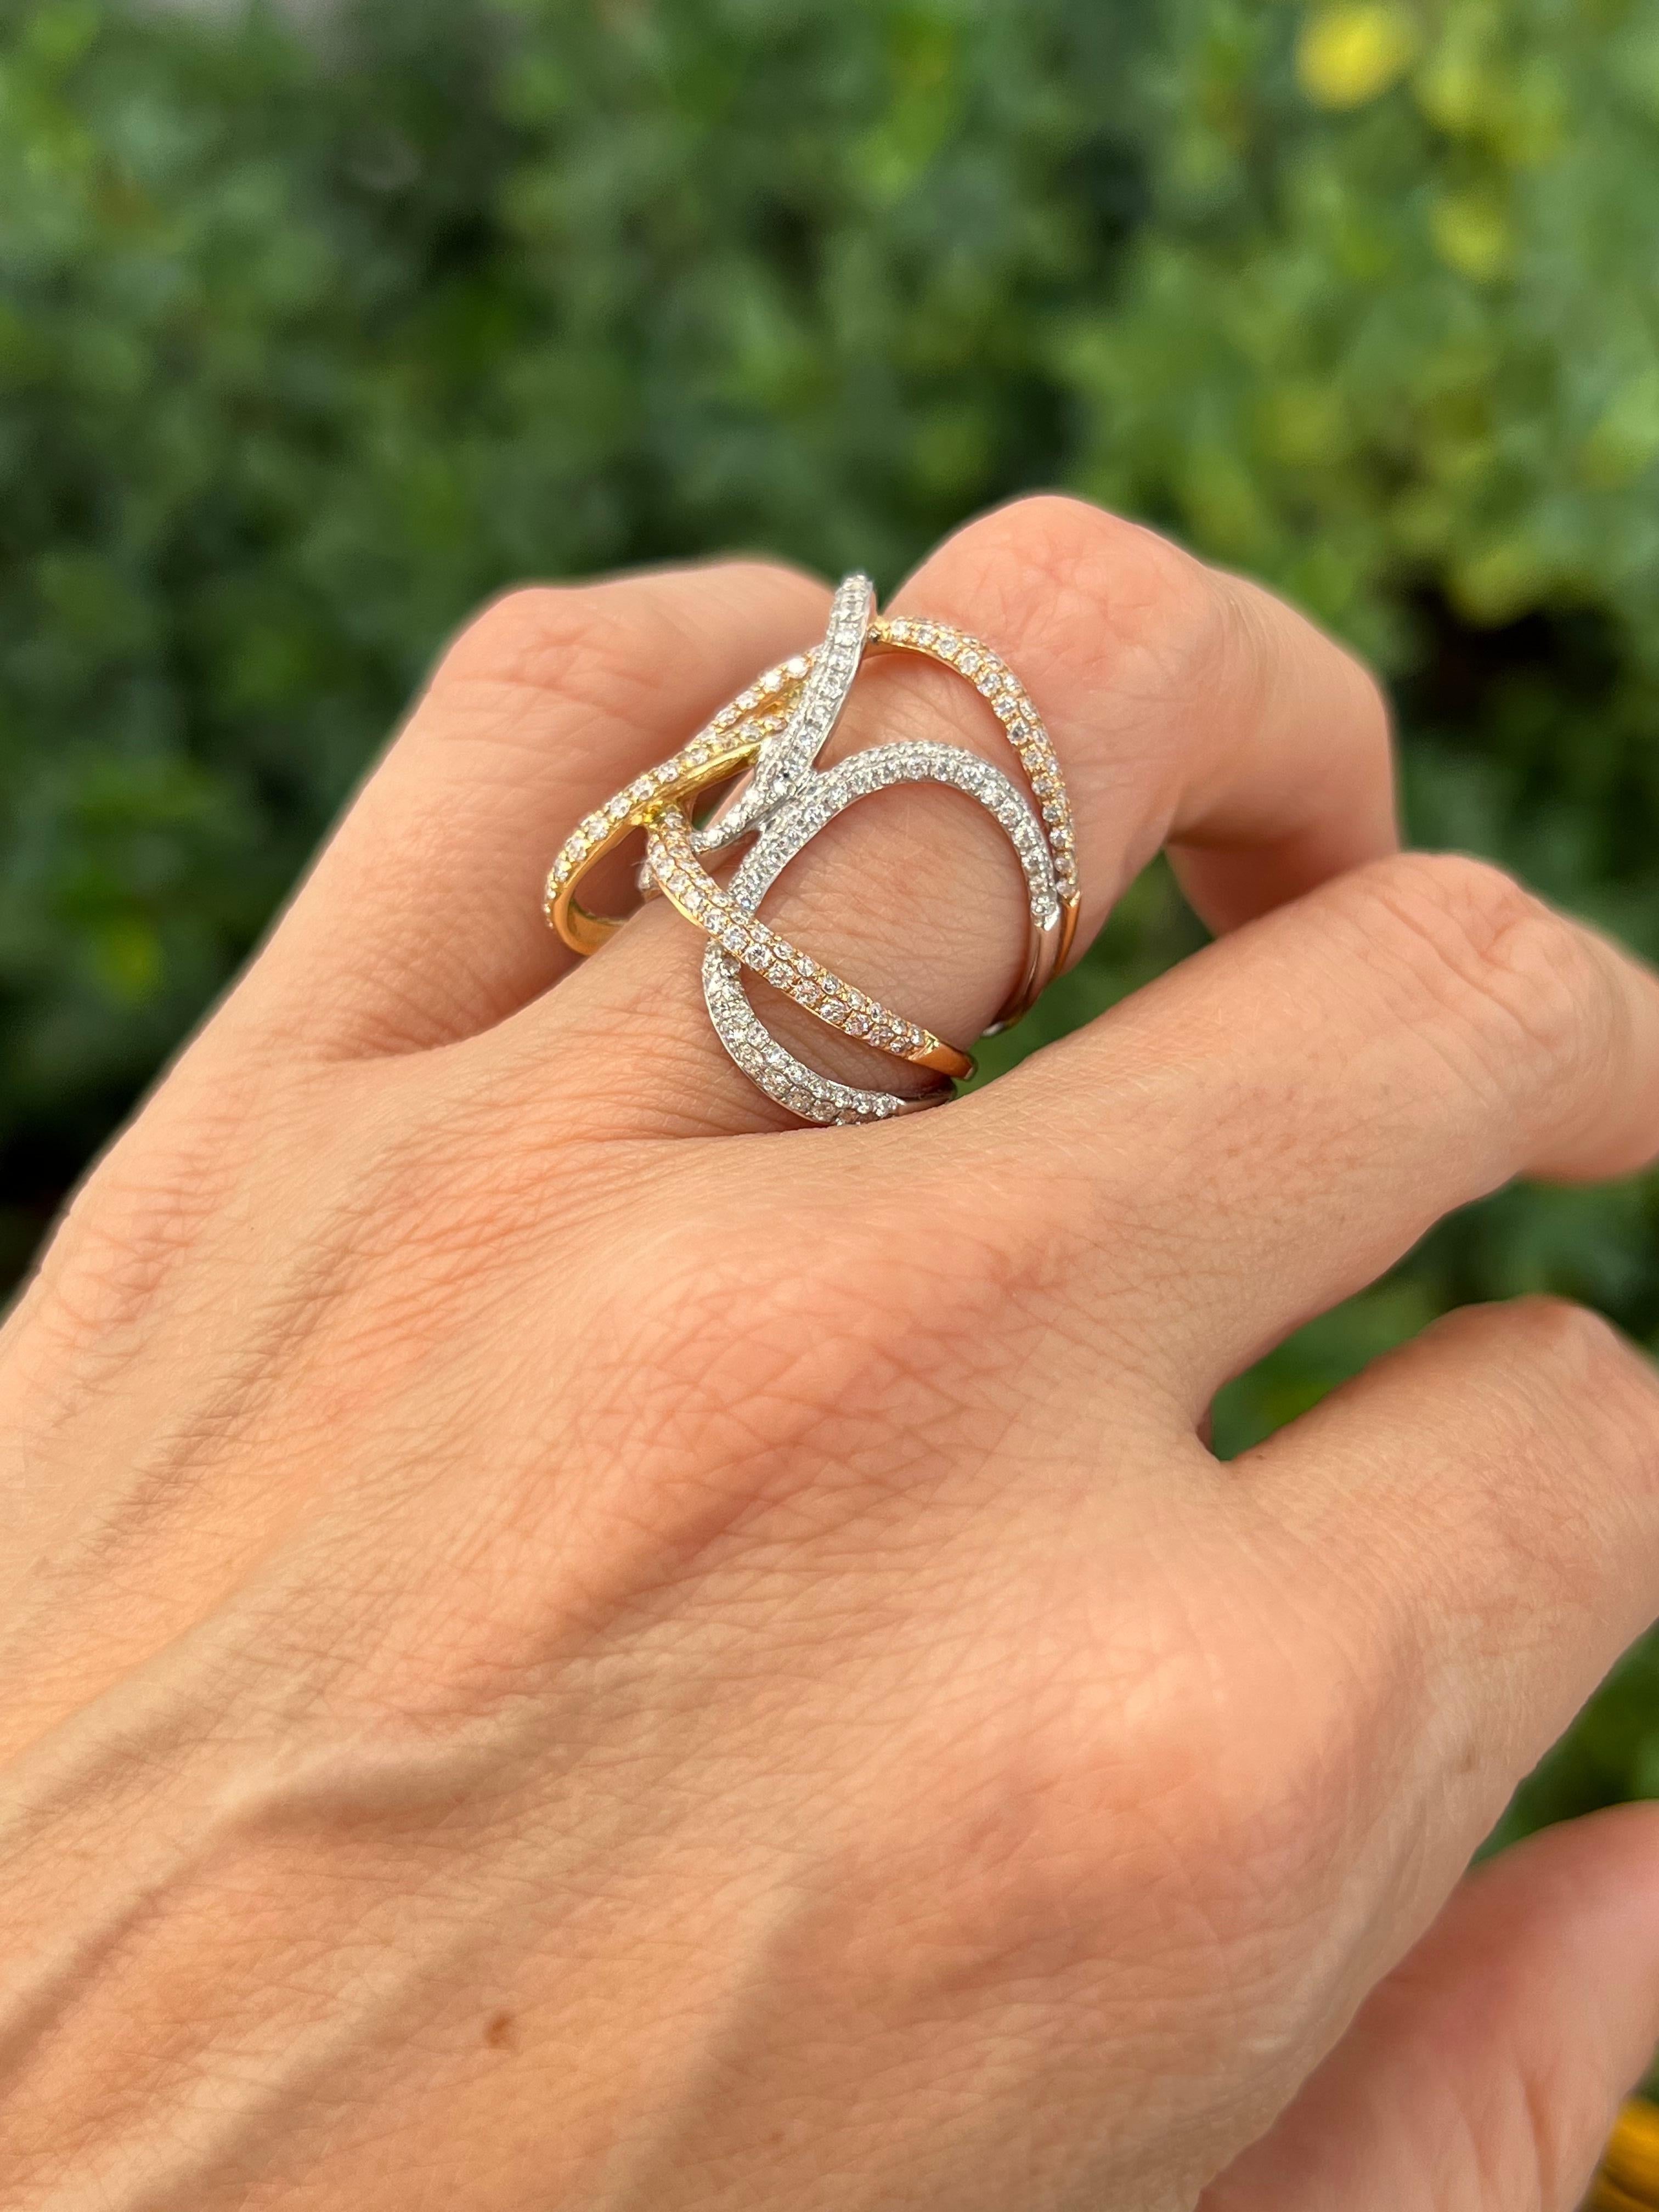 18K tricolor wide diamond band with 1.55 carat total weight in diamonds. Enjoy a wide full 24mm band with fluid movement that tapers around the finger to 6mm for a more comfortable fit. 

Features
18K tricolor gold
1.55 carat total weight
Ring size